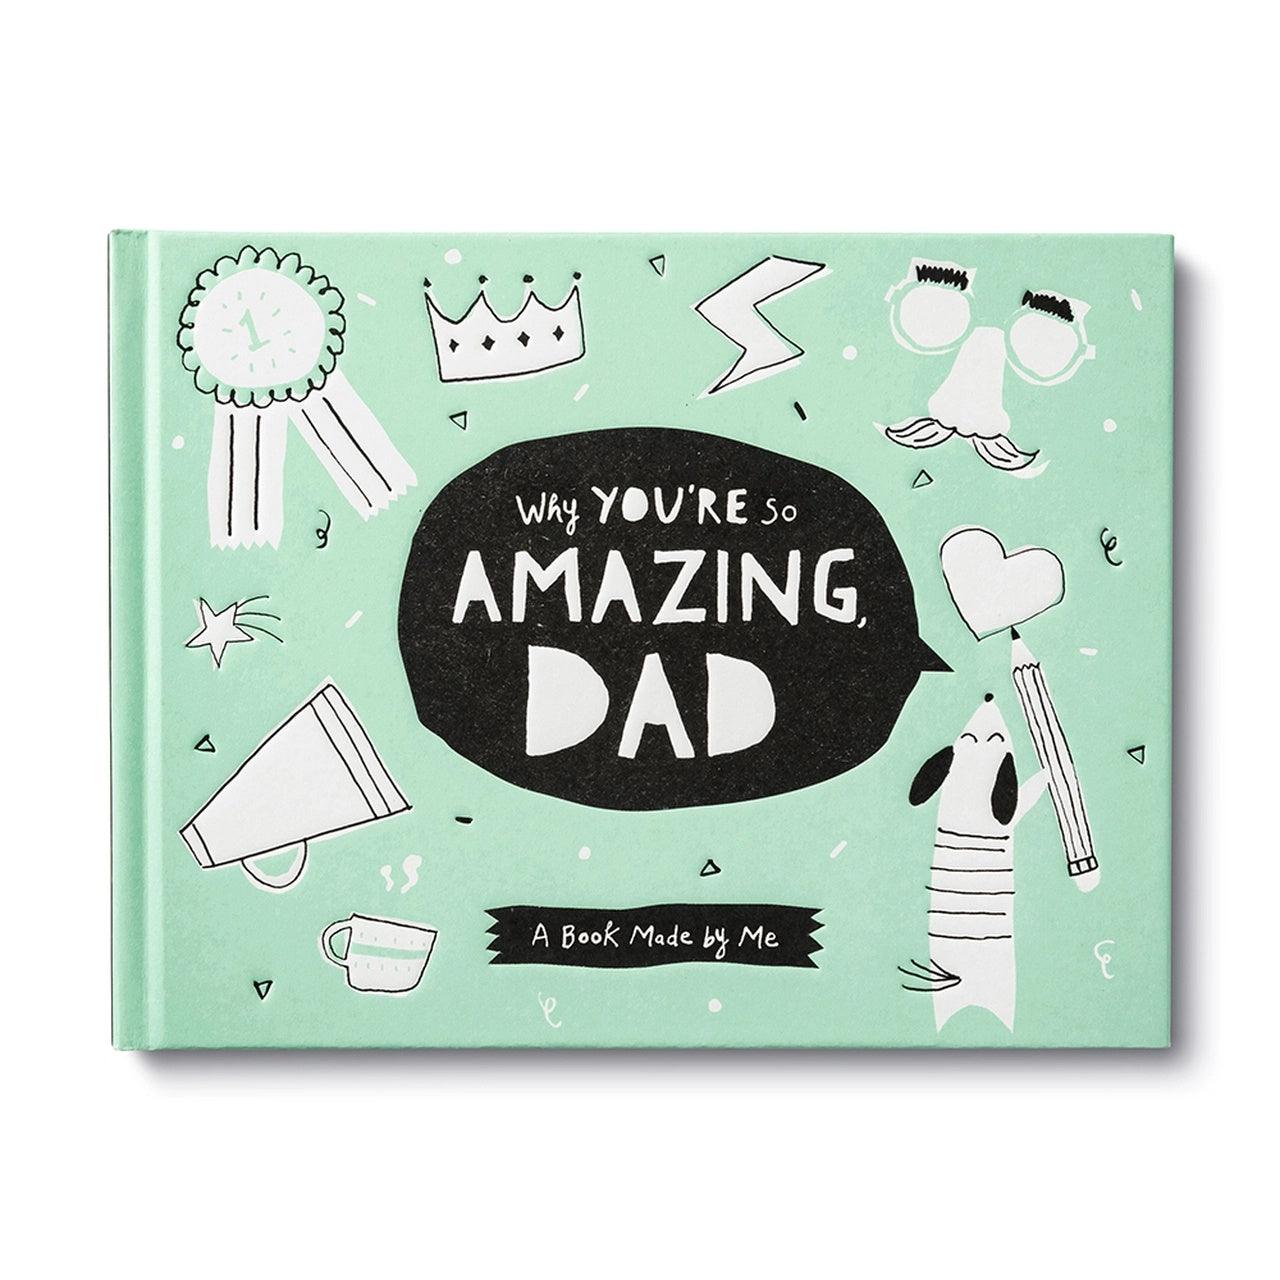 Why You're So Amazing, Dad - A Book Made By Me - Handworks Nouveau Paperie